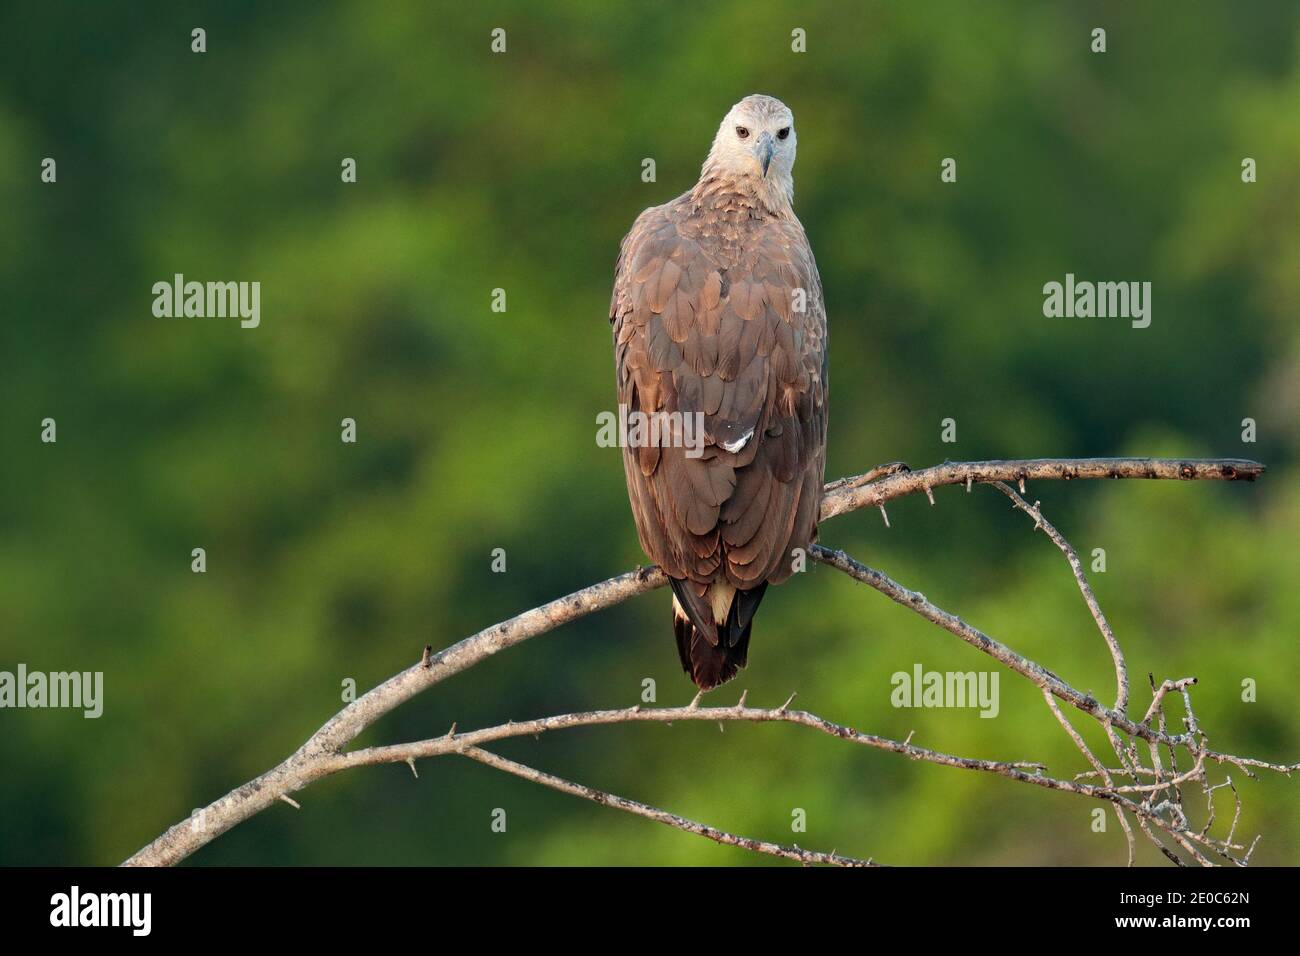 Oriental honey buzzard, Pernis ptilorhynchus, perched on branch in nice morning light against blurred forest in background. Wildlife scene from forest Stock Photo